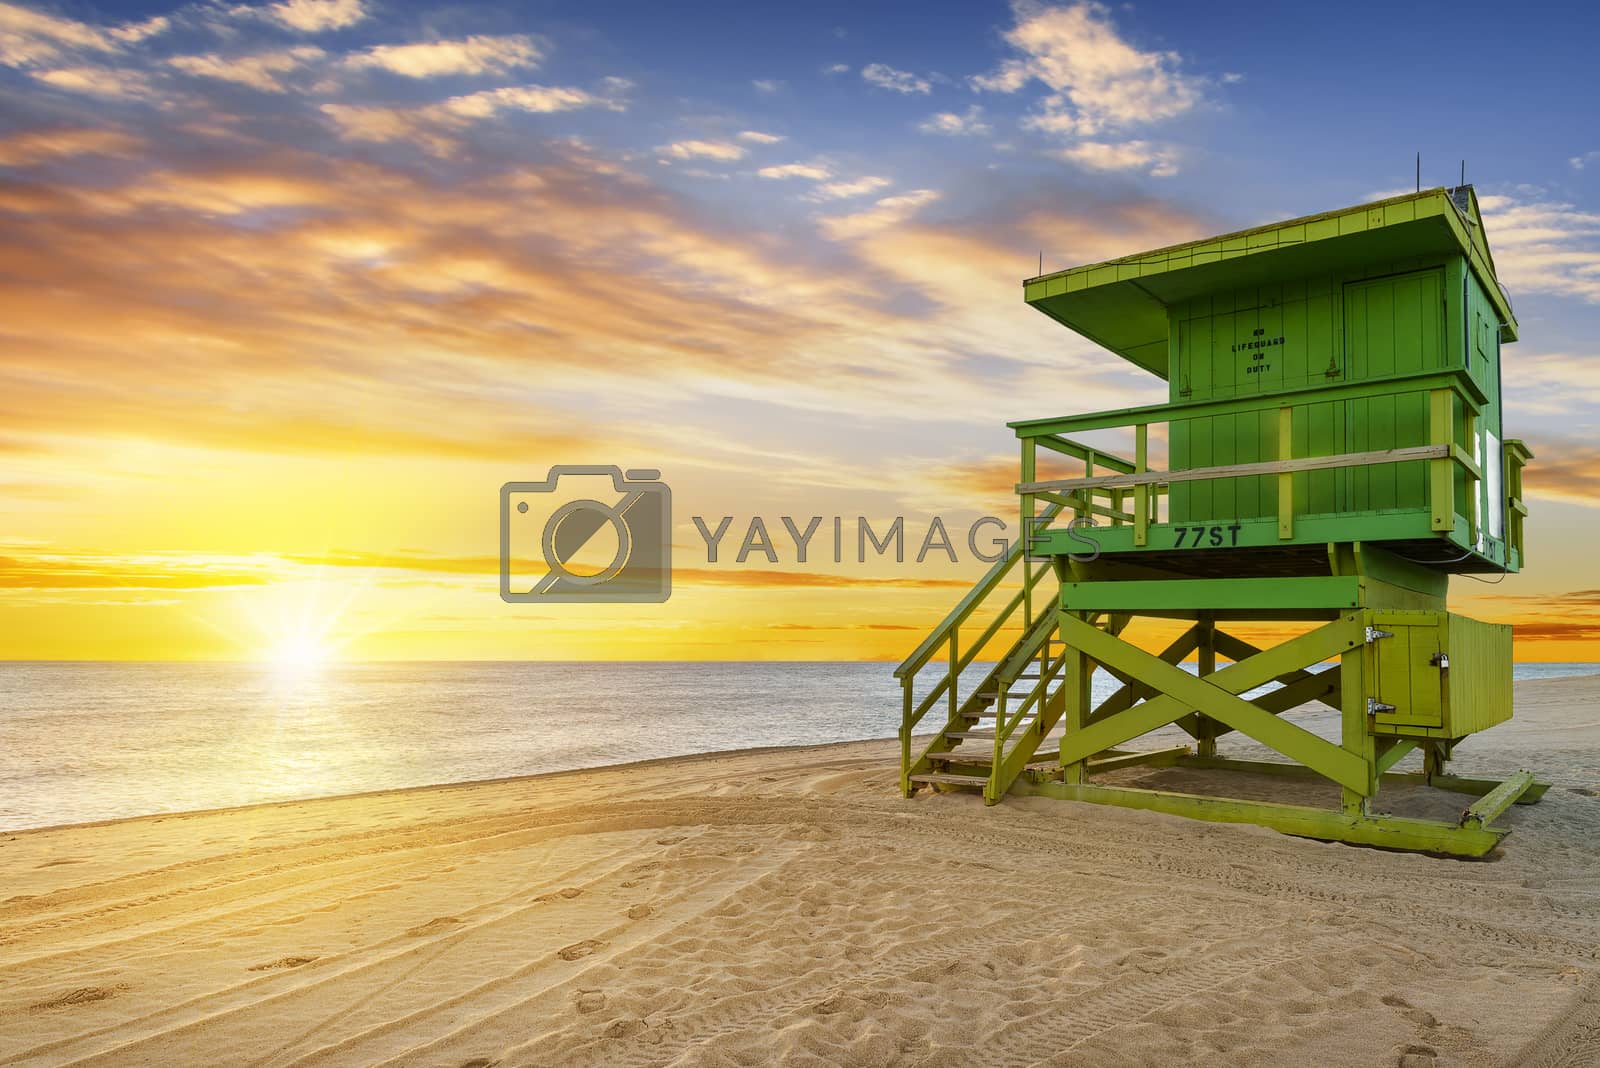 Royalty free image of Miami South Beach sunrise by ventdusud